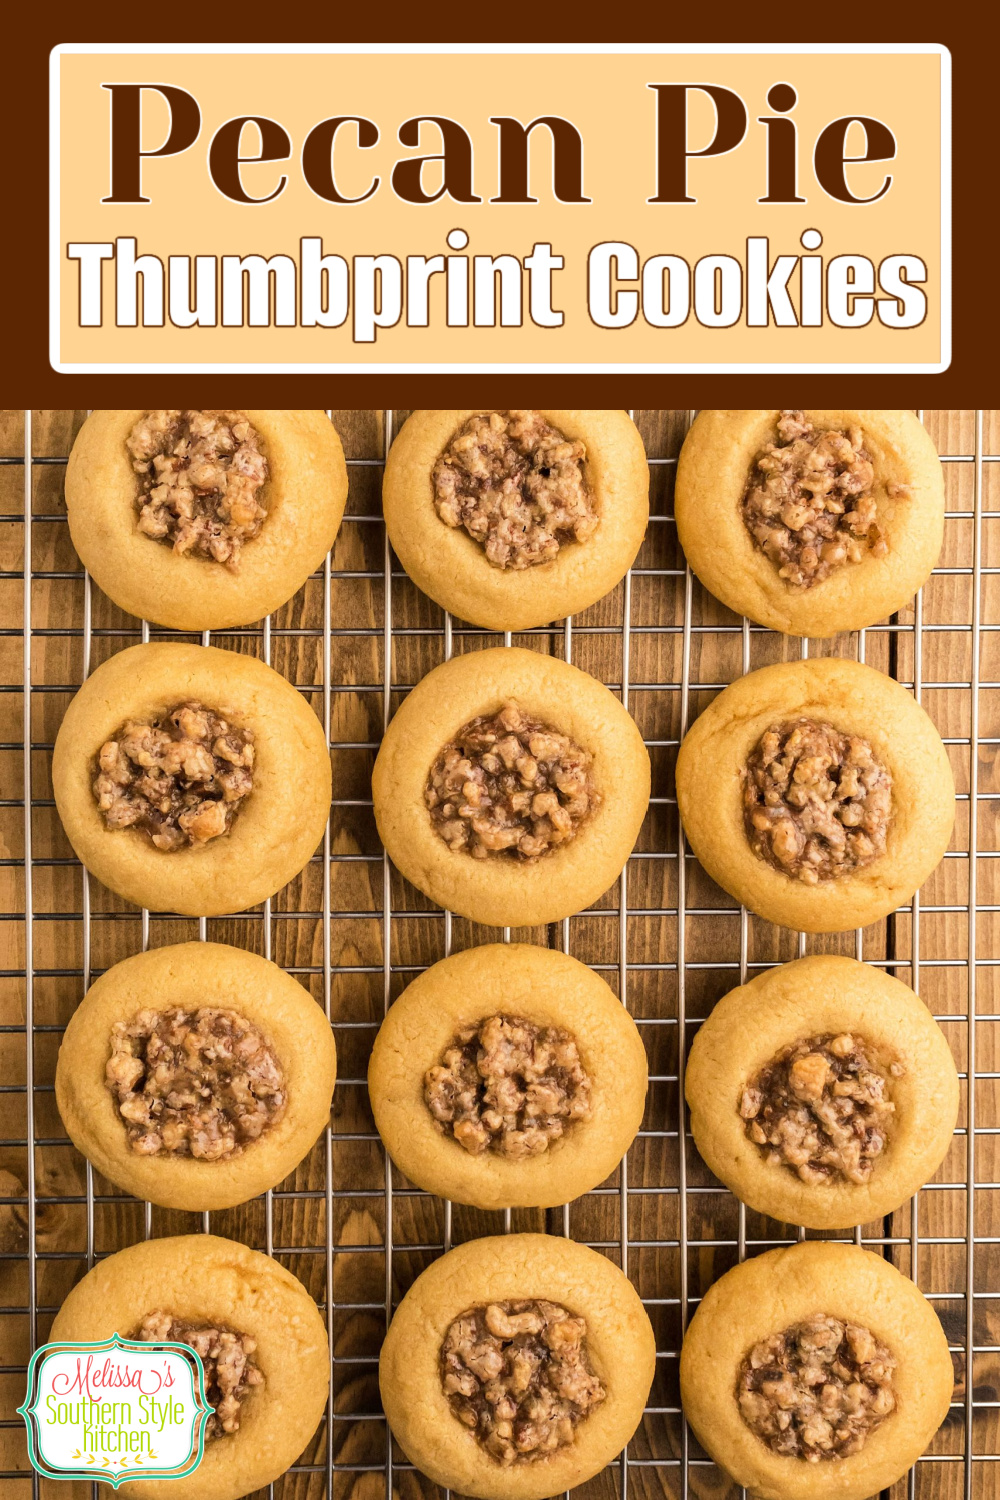 These Pecan Pie Thumbprint Cookies are a fusion of flavor combining pecan pie and buttery homemade cookies into one irresistible treat #pecanpie #pecanpiecookies #cookies #fallbaking #southernpecanpierecipe #easycookies #pecanpierecipe #Christmascookies via @melissasssk